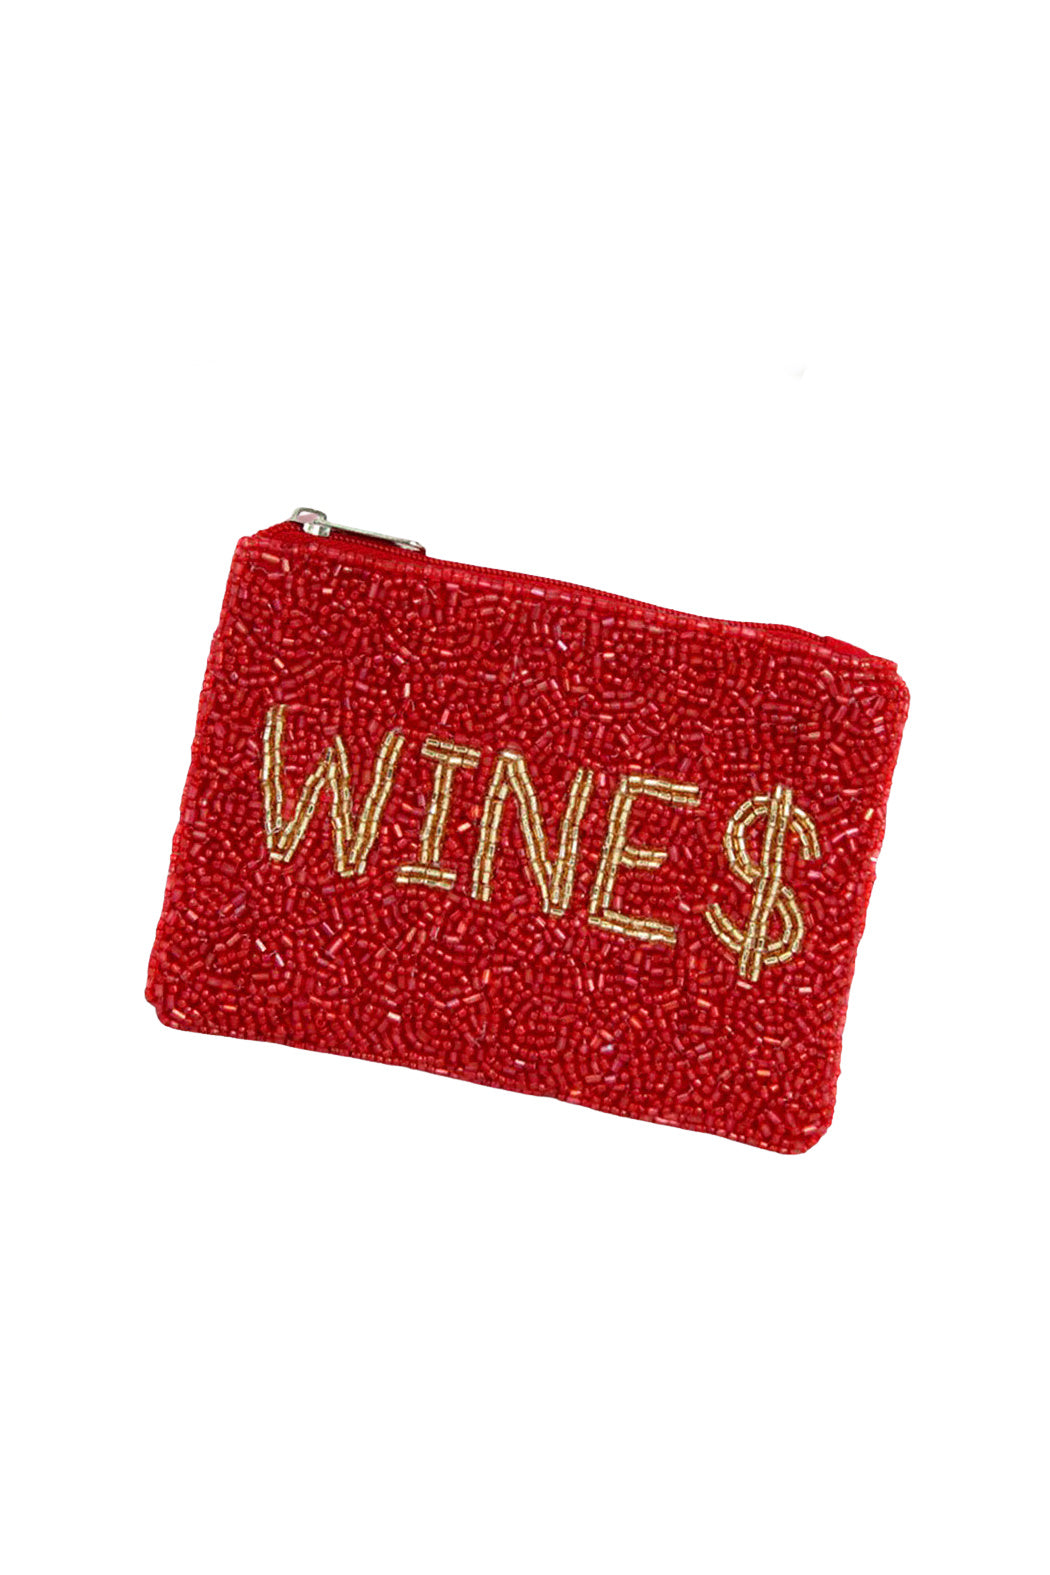 WINE $ Beaded Pouch